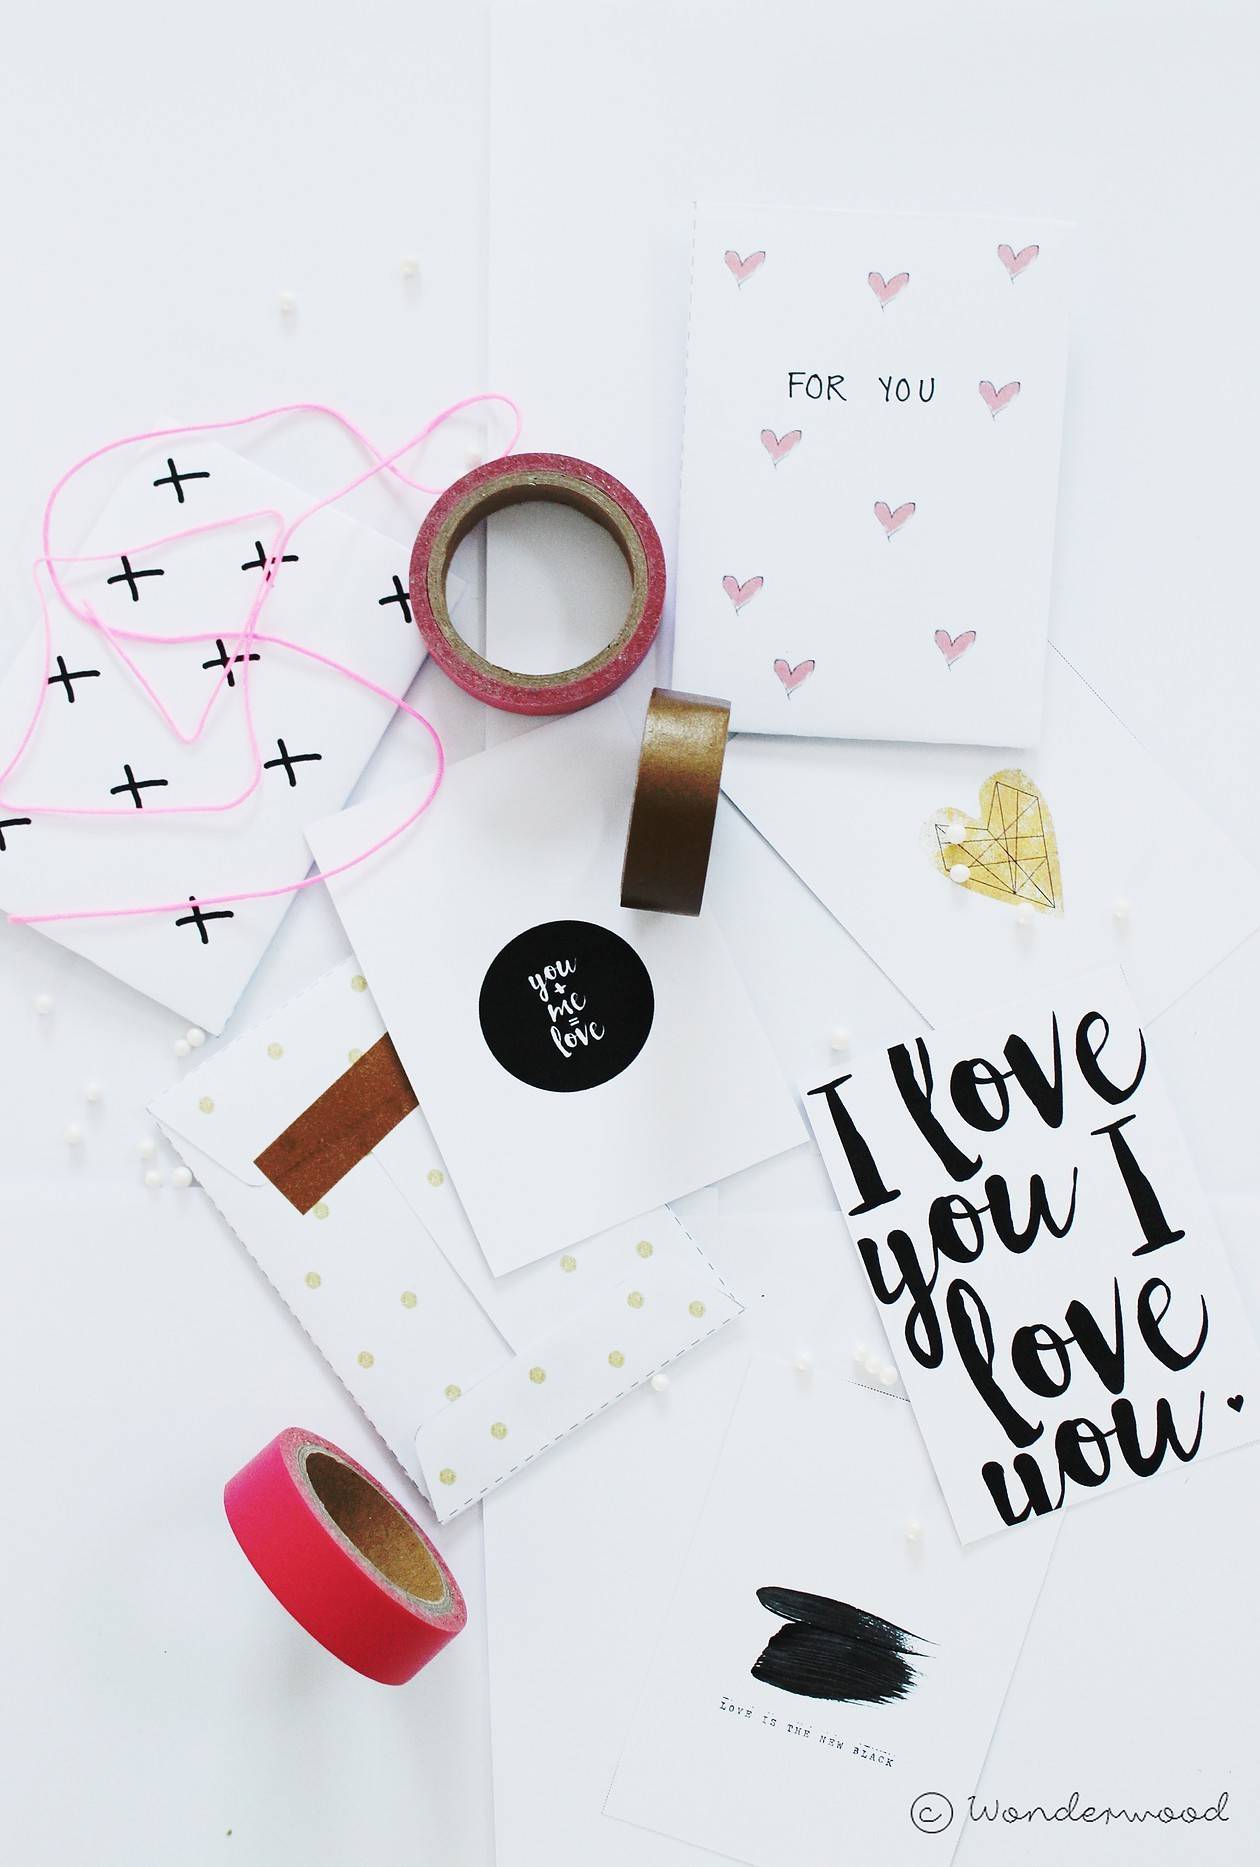 14 Hand-lettered Valentines To Print & Gift Your Love 